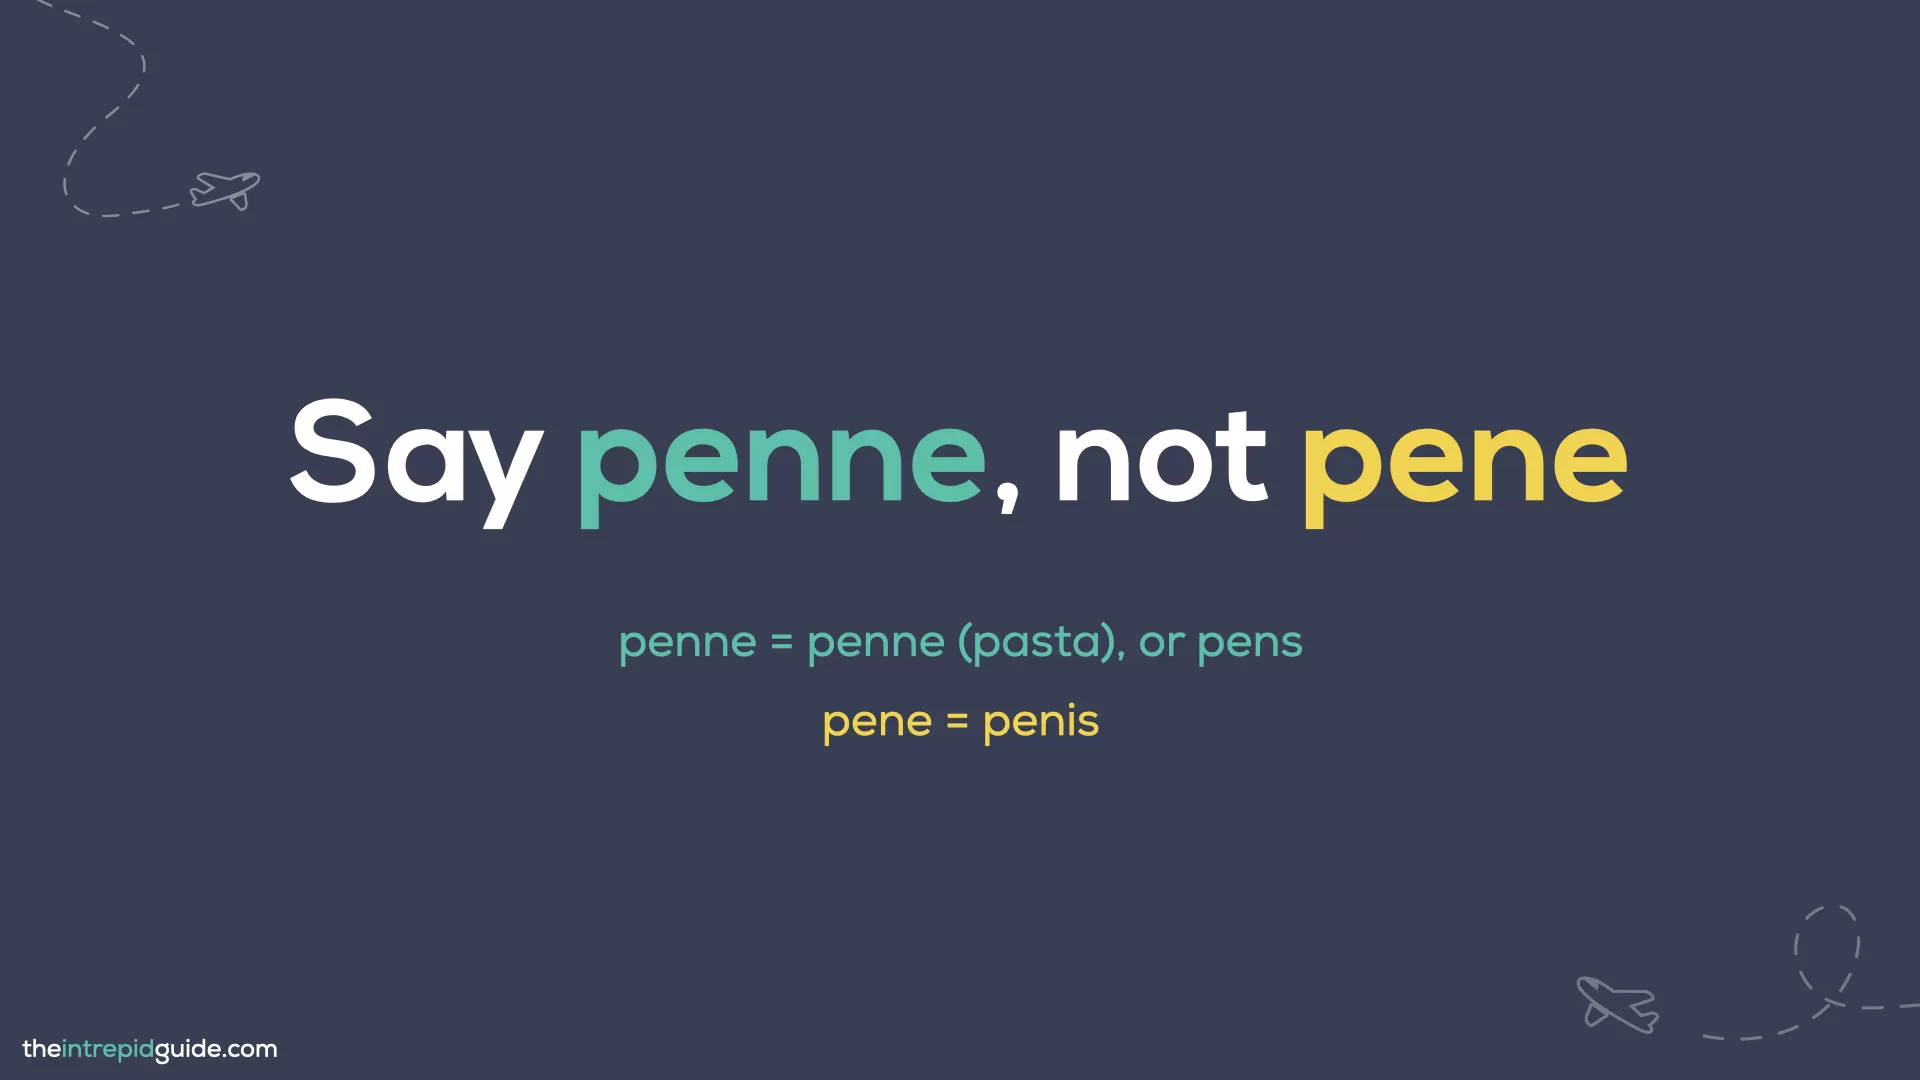 Italian Words You Should Never Mispronounce - Say penne not pene